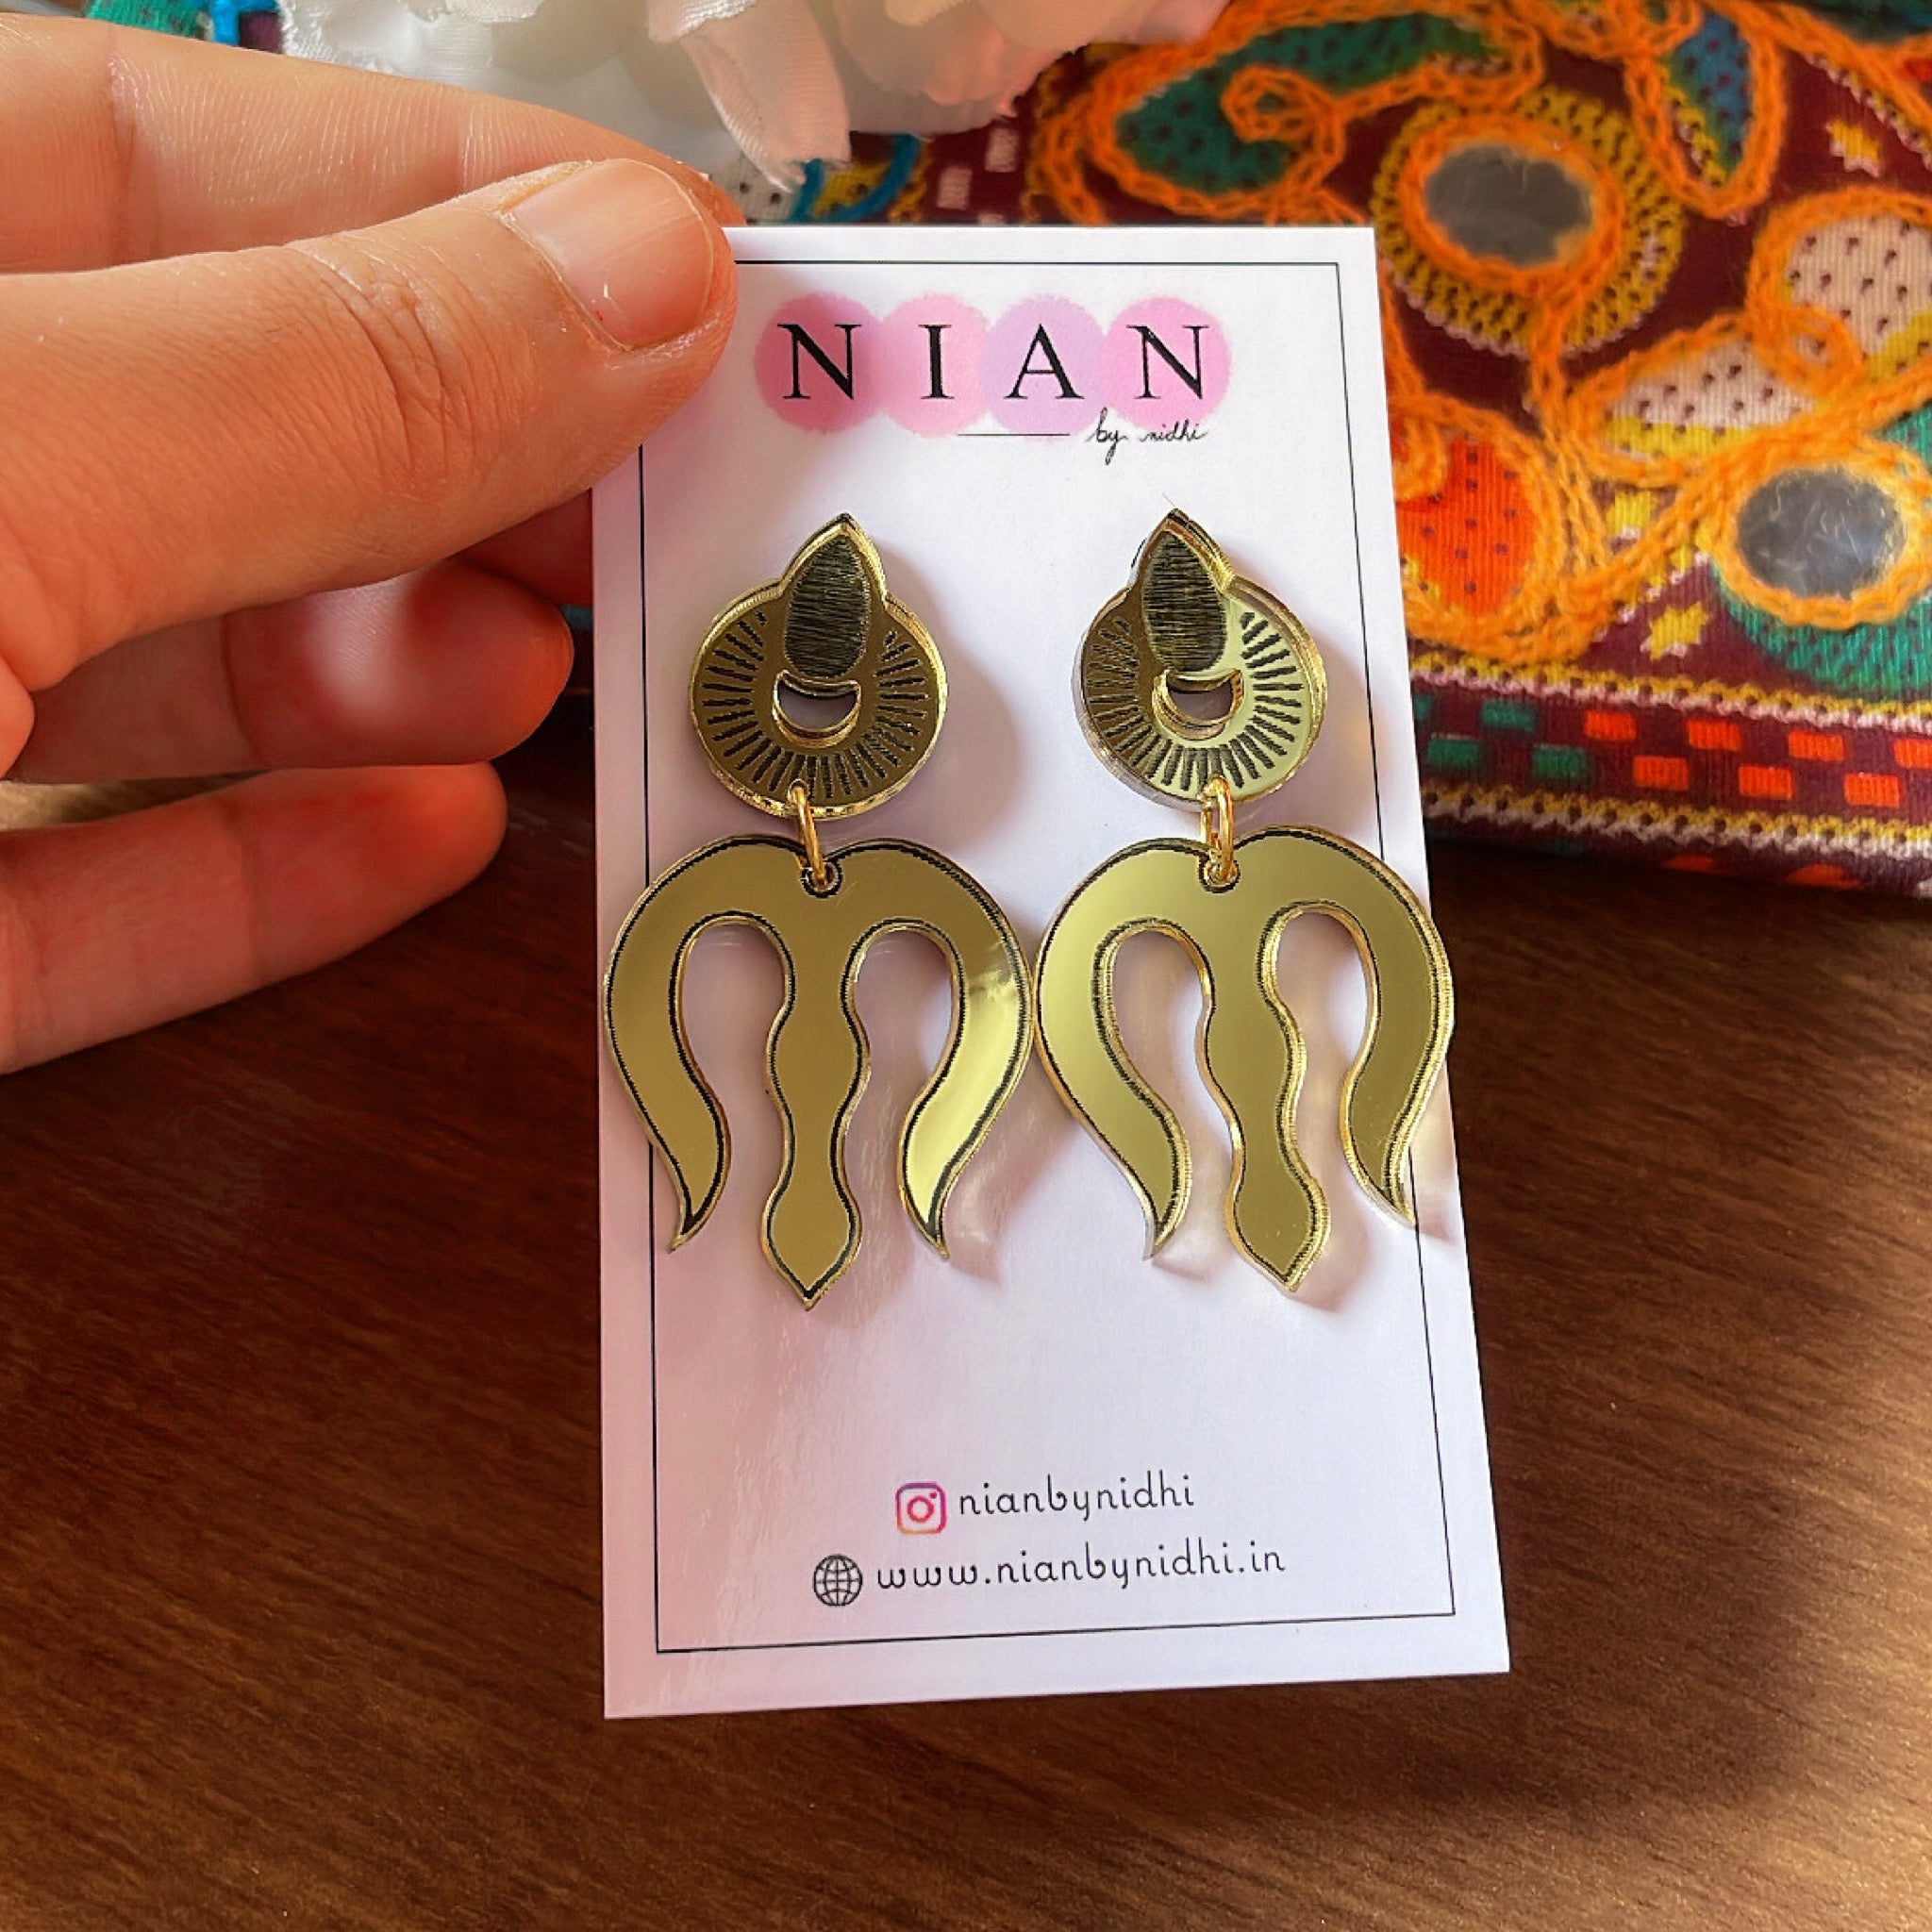 Trishul Earrings - Nian by Nidhi - Glassy Golden - placed in a brown and colorful background, held in a hand